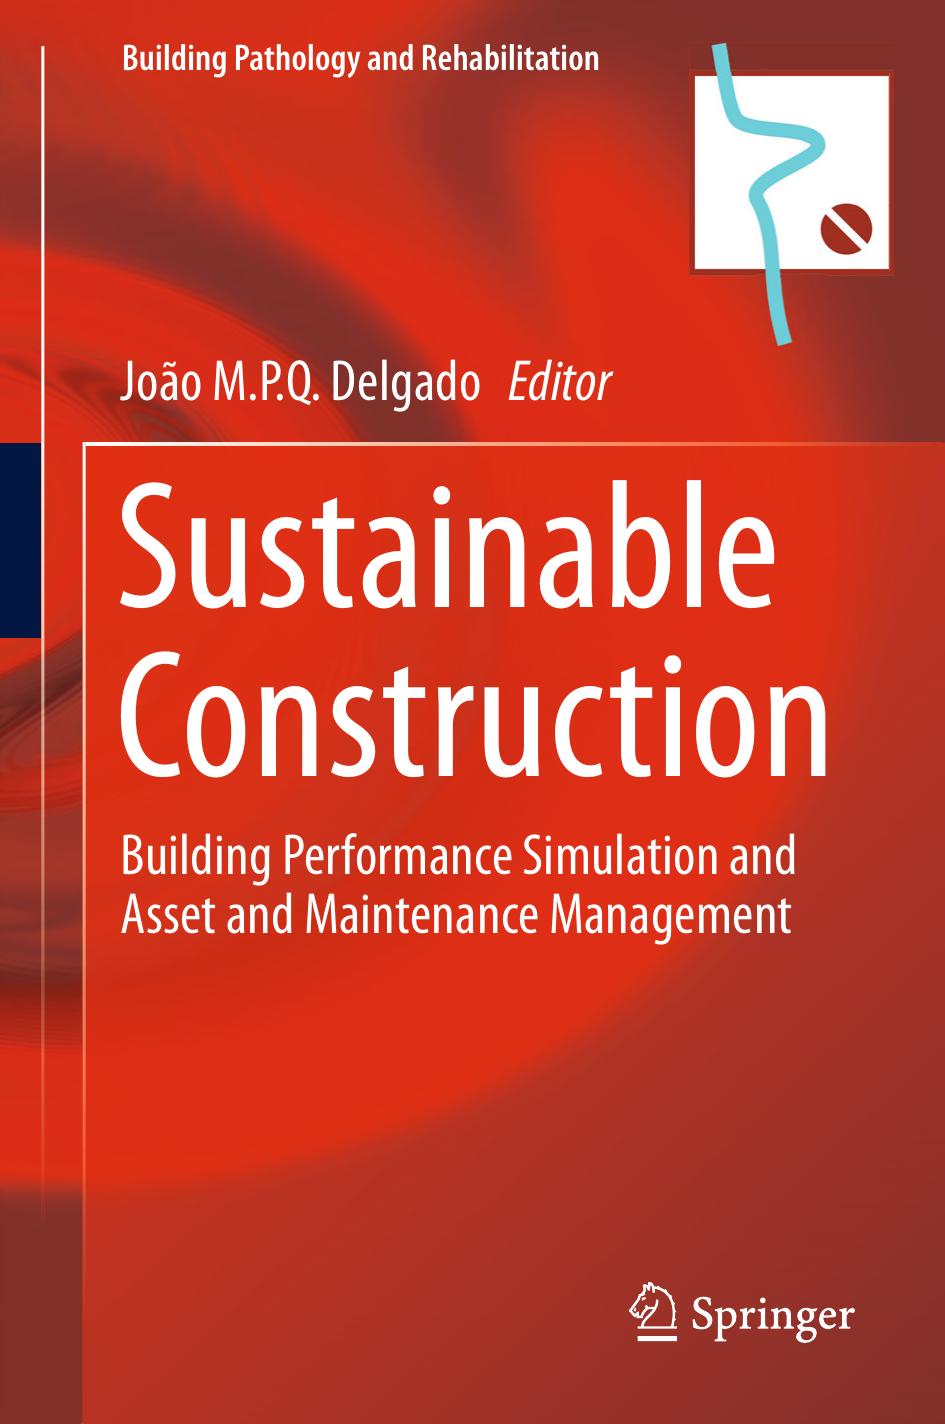 Sustainable Construction  Building Performance Simulation and Asset and Maintenance Management,(2016)